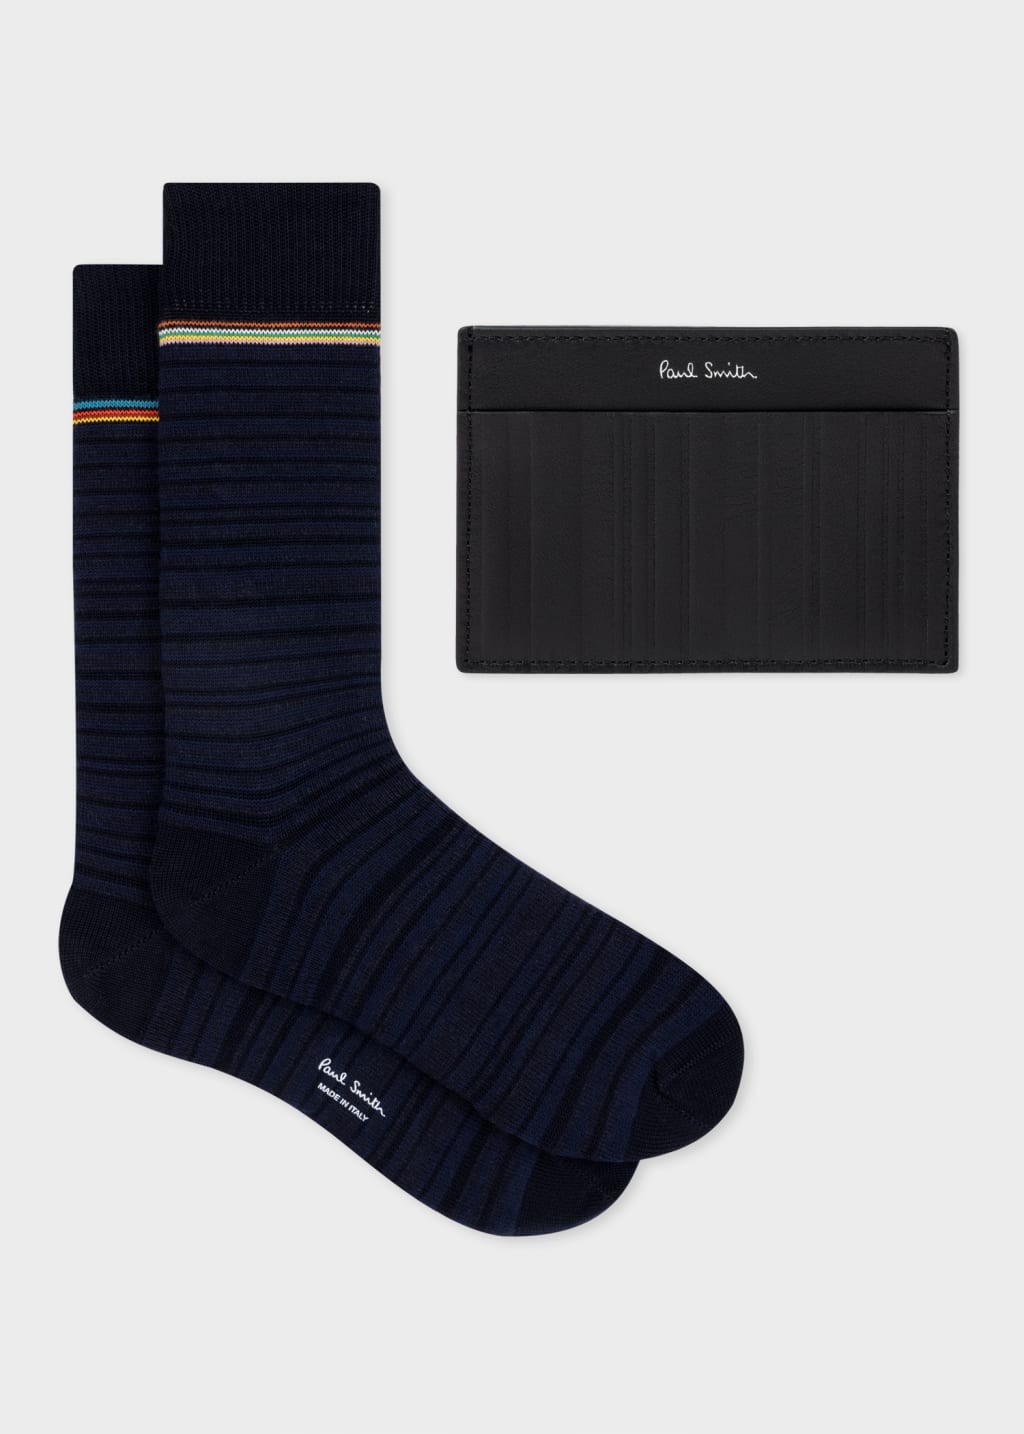 Product View - 'Shadow Stripe' Socks & Card Holder Gift Set by Paul Smith